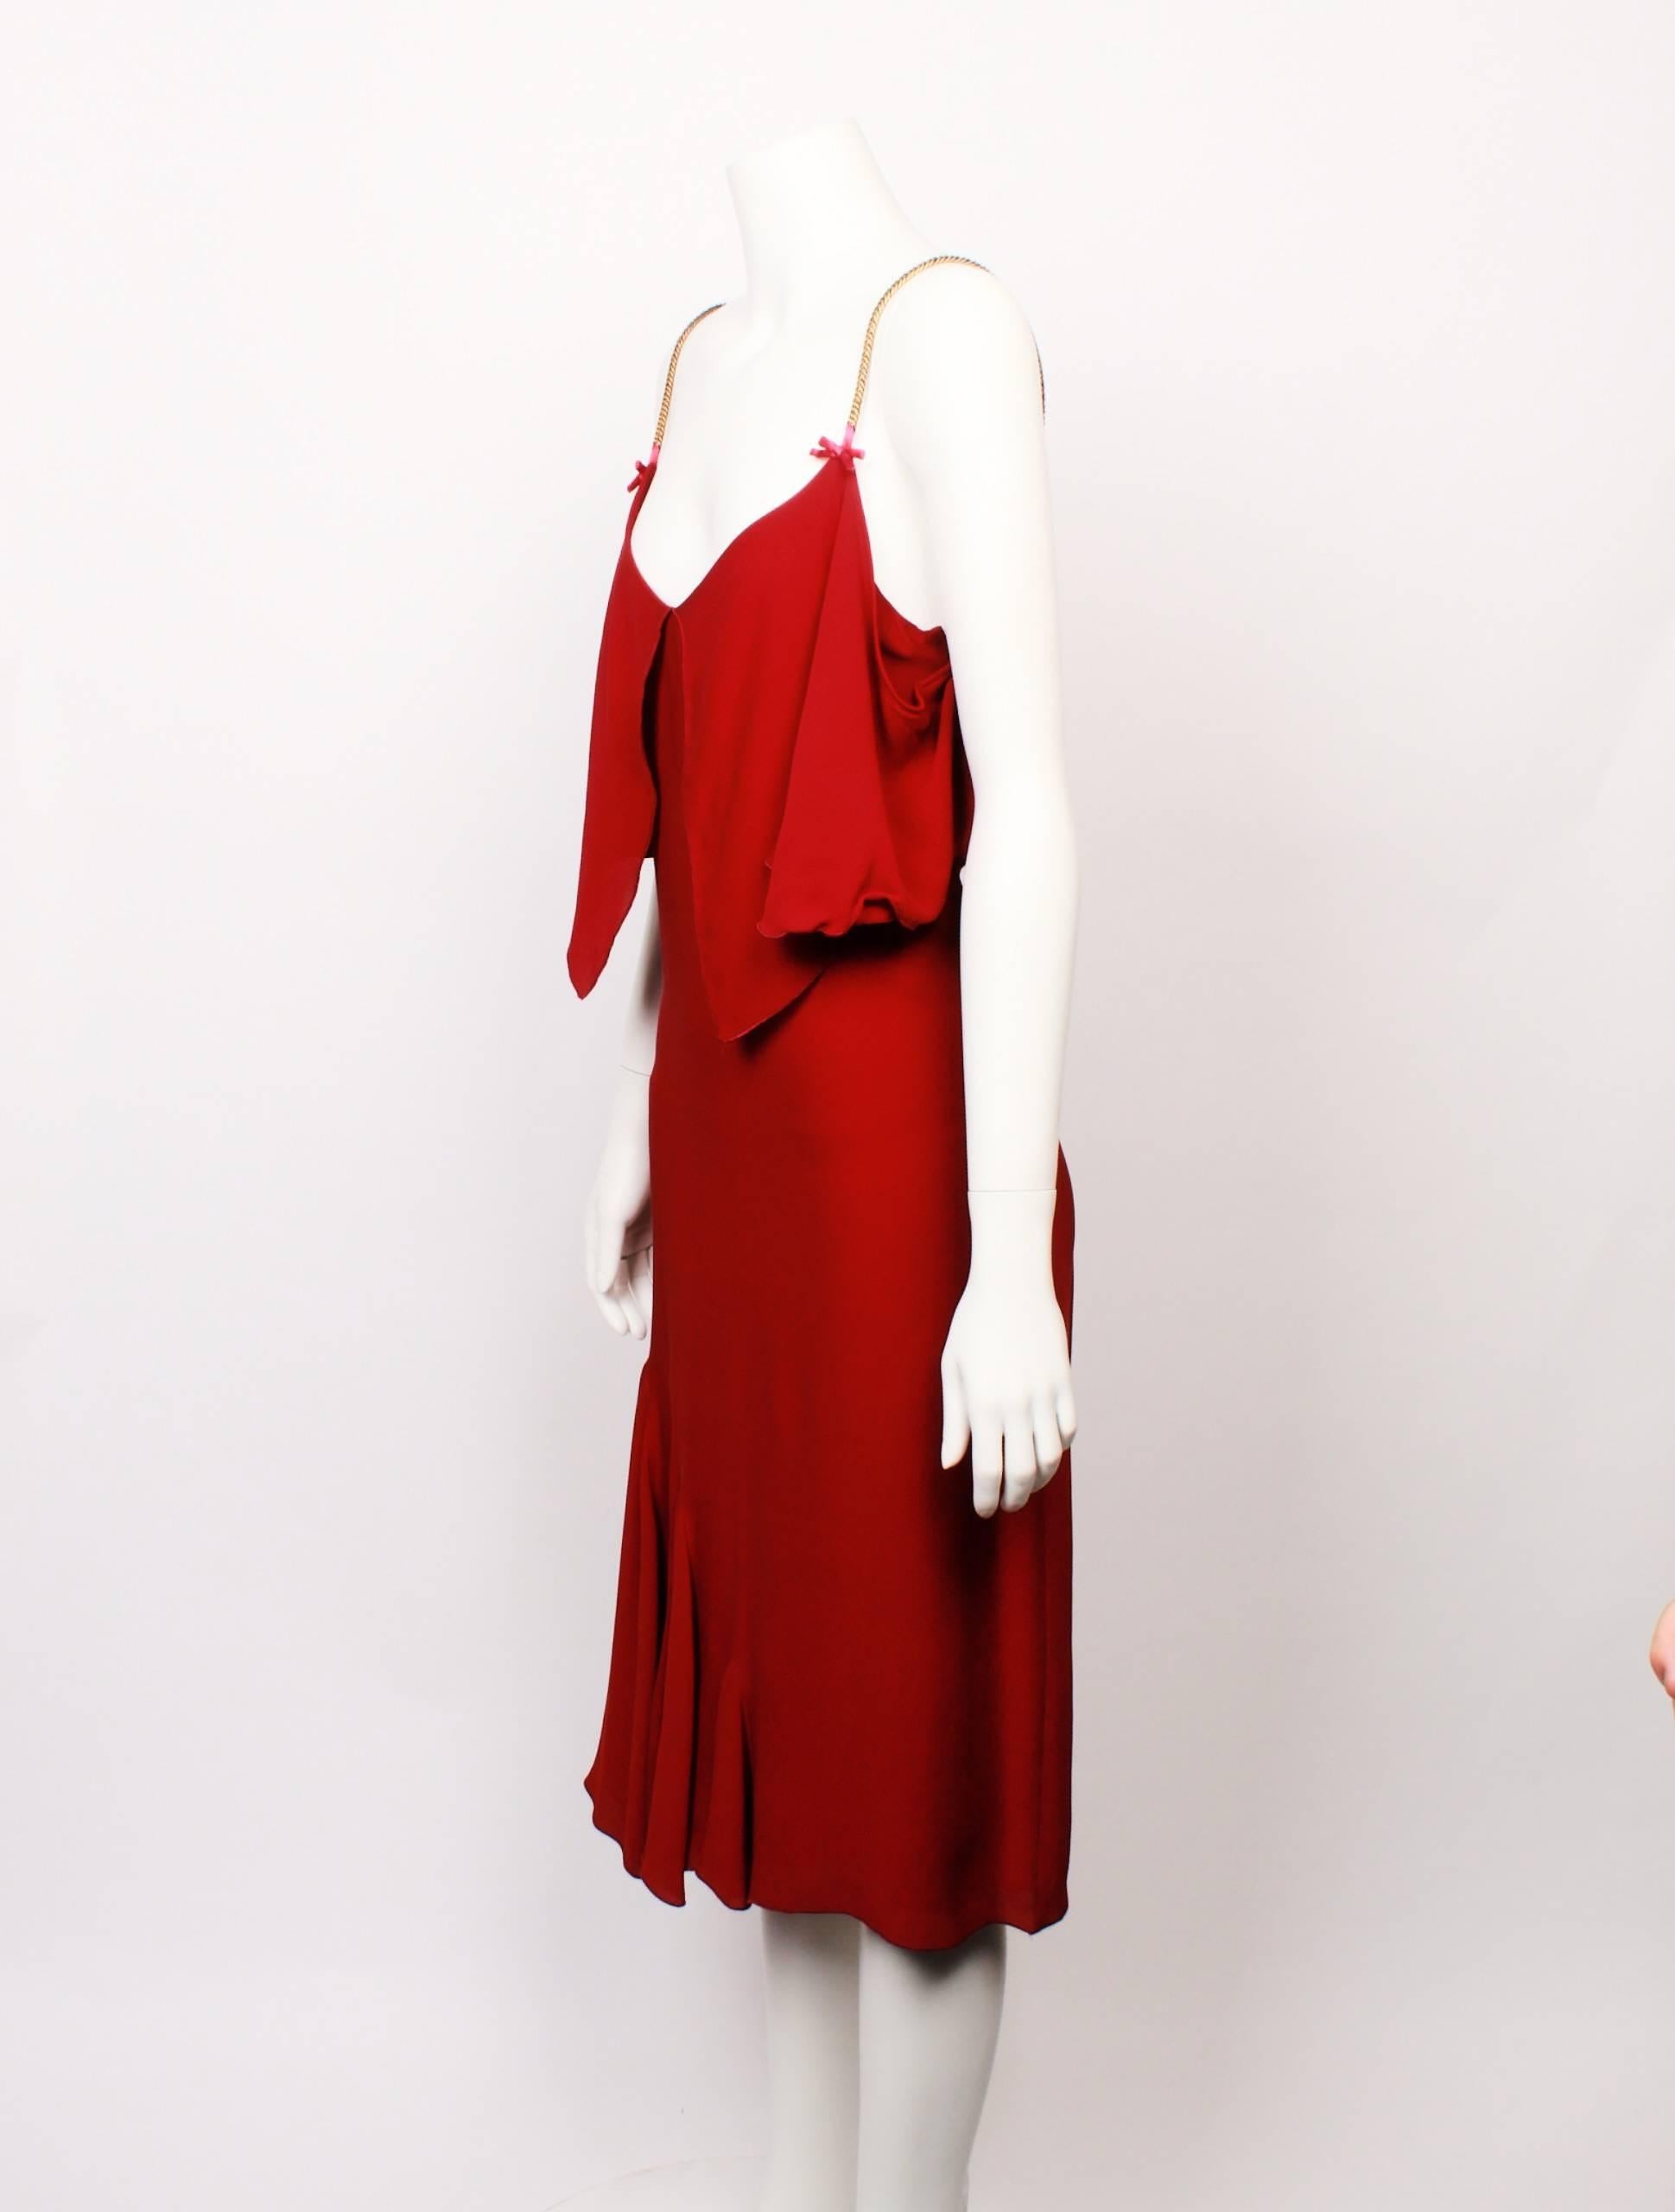 Elegant Viktor & Rolf Red Jersey Cocktail Dress features gold chain straps and cute satin bow detail. 
The silhouette is classic yet sexy with a flared gored panel on one side of the hemline. 
Bodice features gorgeous maxi frill overlay that forms a